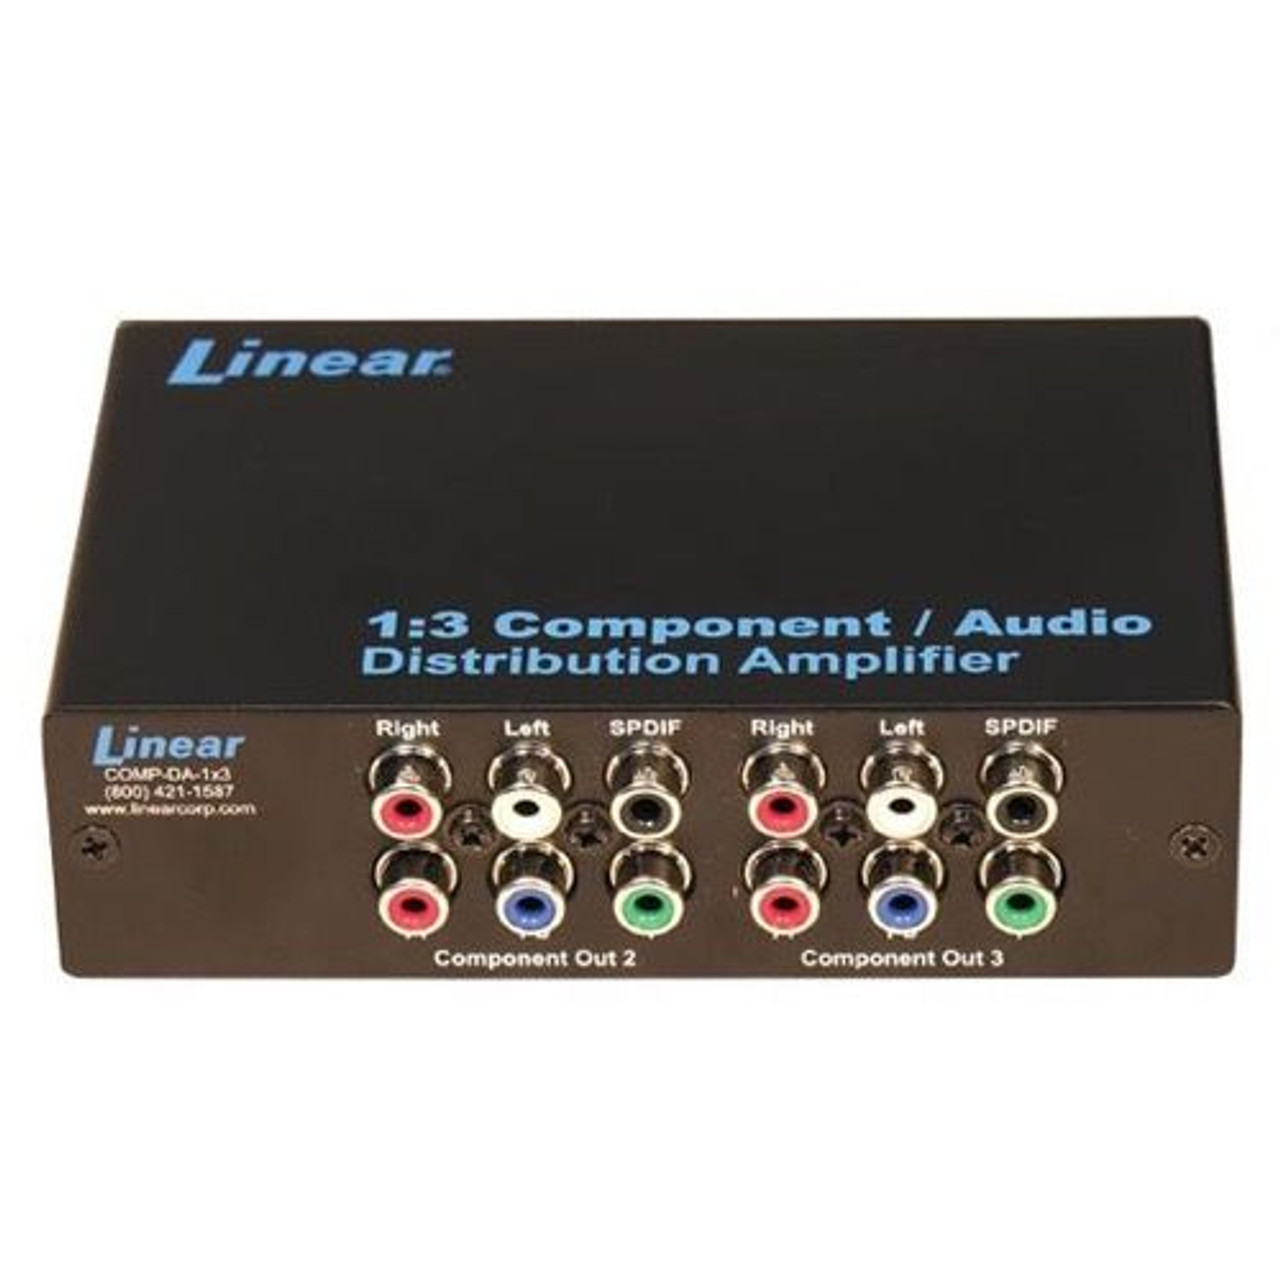 Channel Plus COMP-DA-1X3 1.3 Component Audio Distribution Amplifier Multiplex 3-Way Output by Gefen Distributes One HD Video Component Source with Audio to Three TV Locations, 1 Input to 3 Output, Part # COMPDA1X3